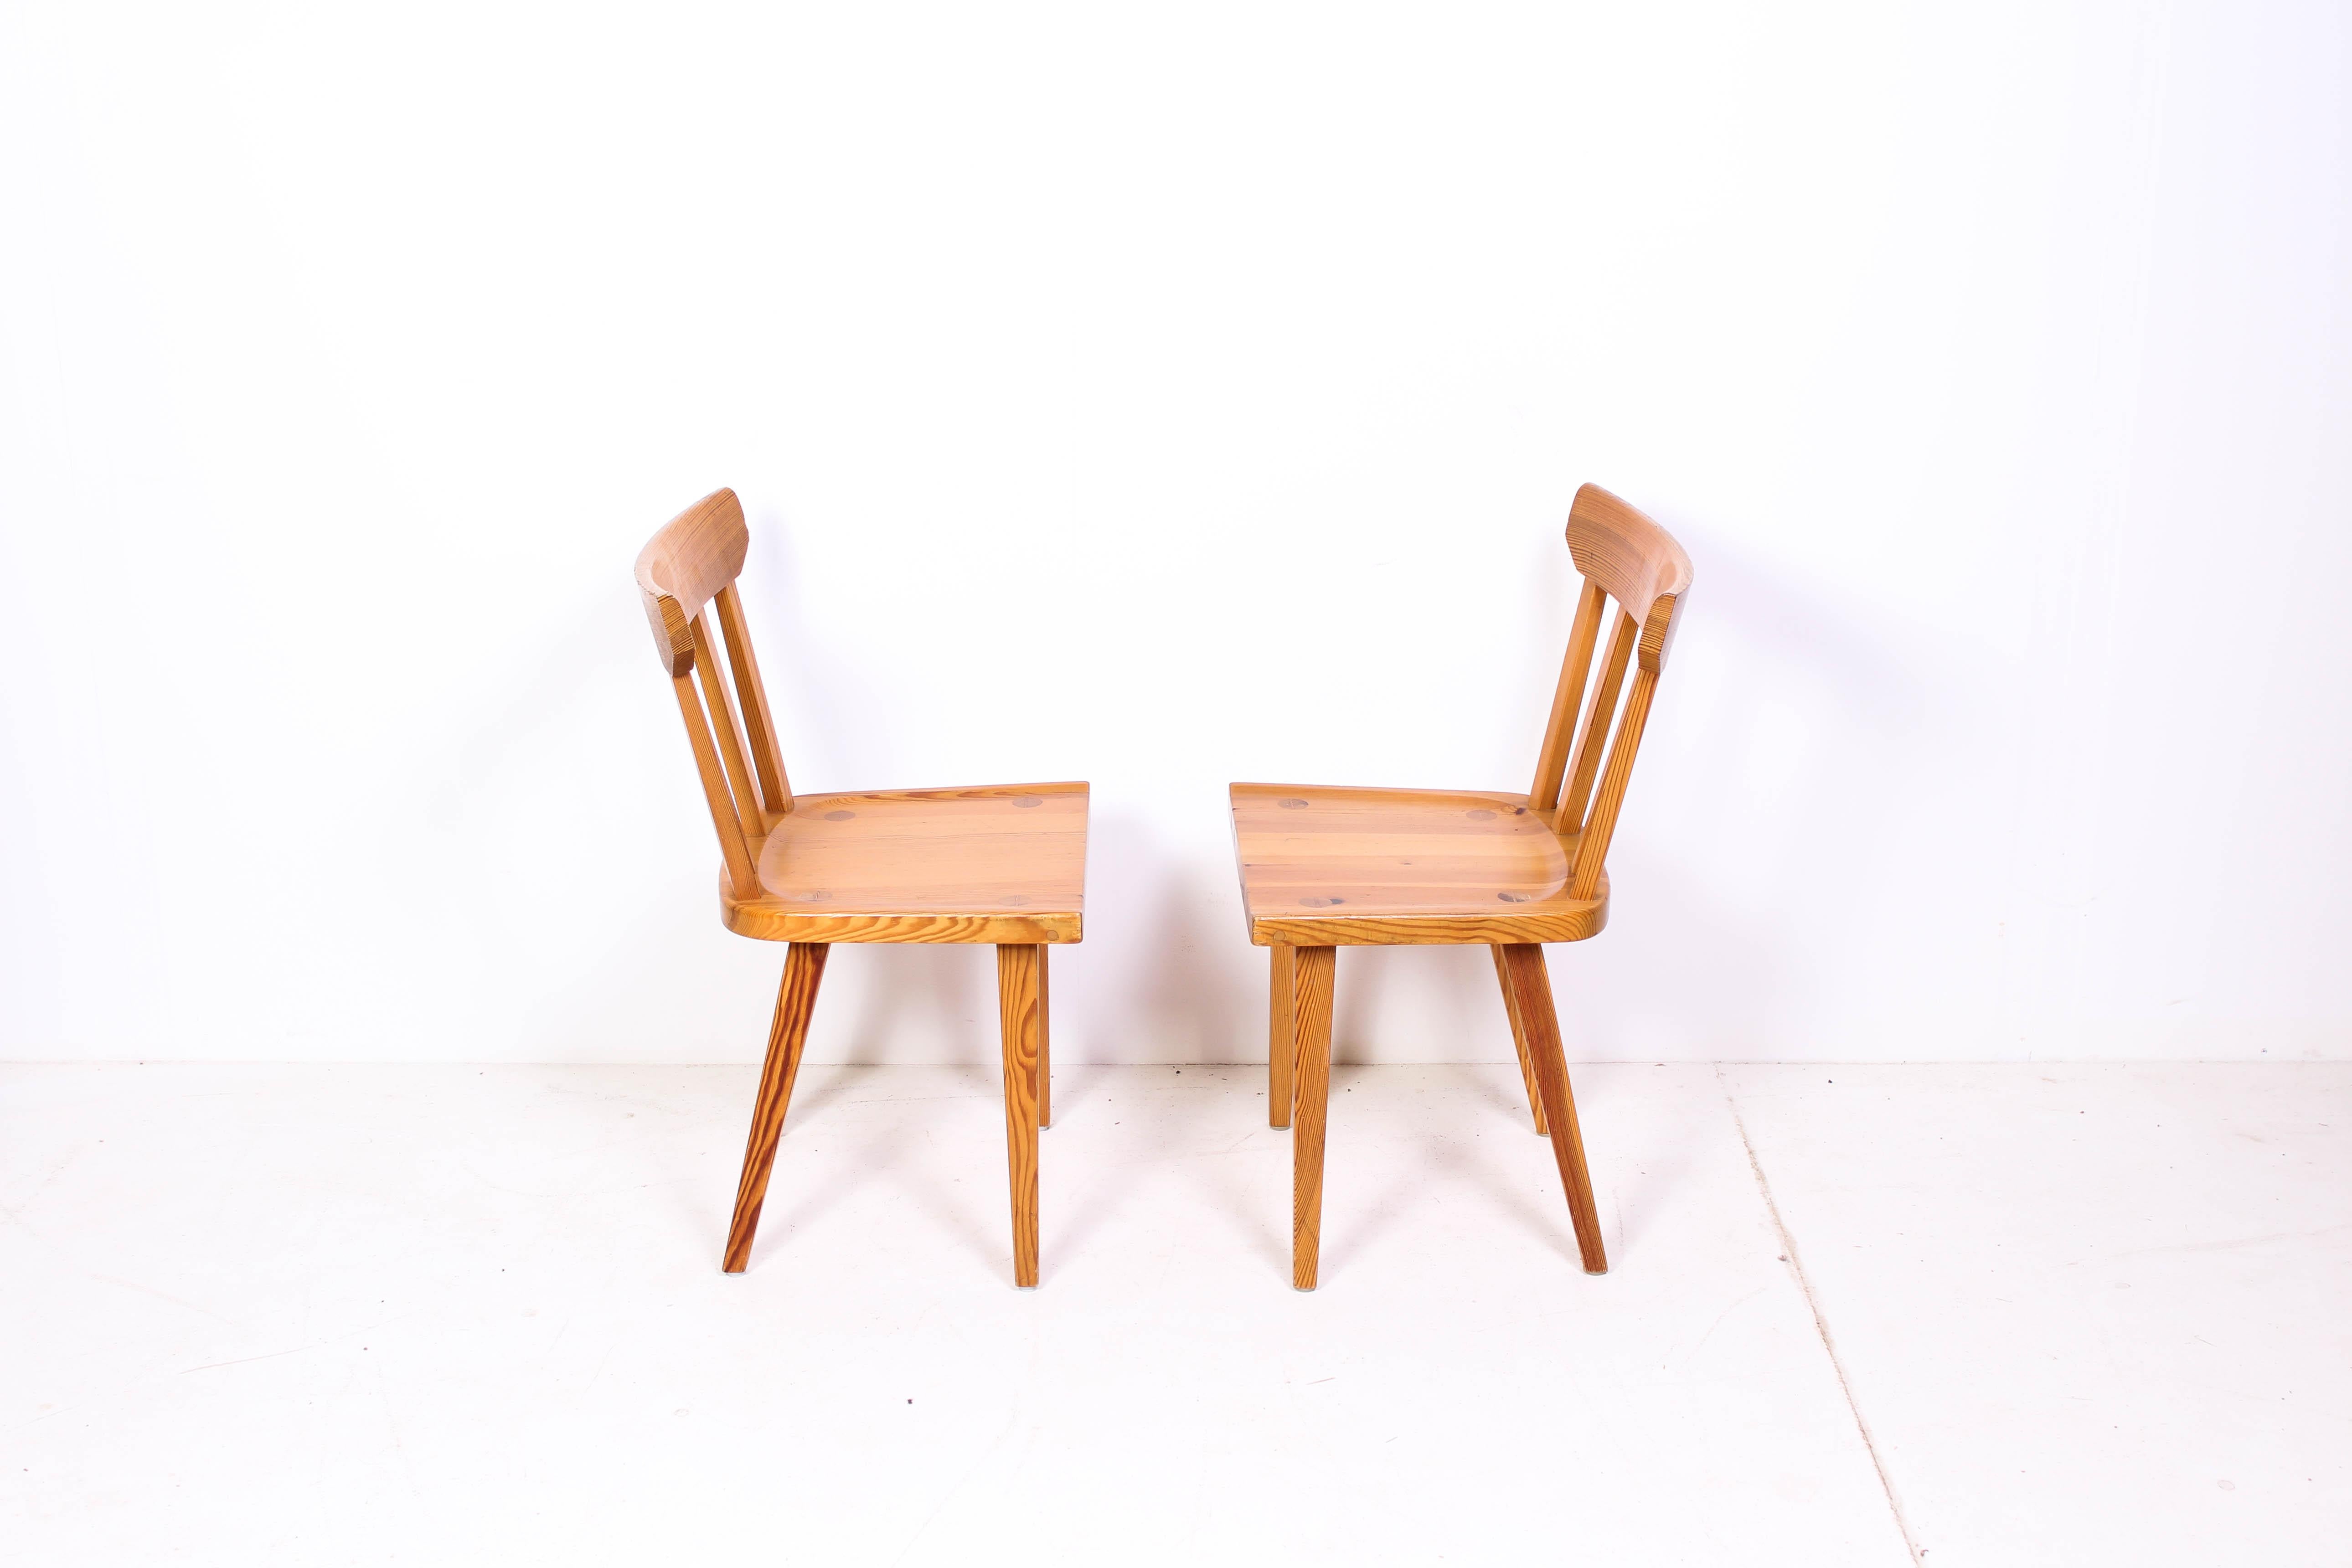 Pair of Midcentury Pine Dining Chairs by Karl Andersson & Söner (Kiefernholz)